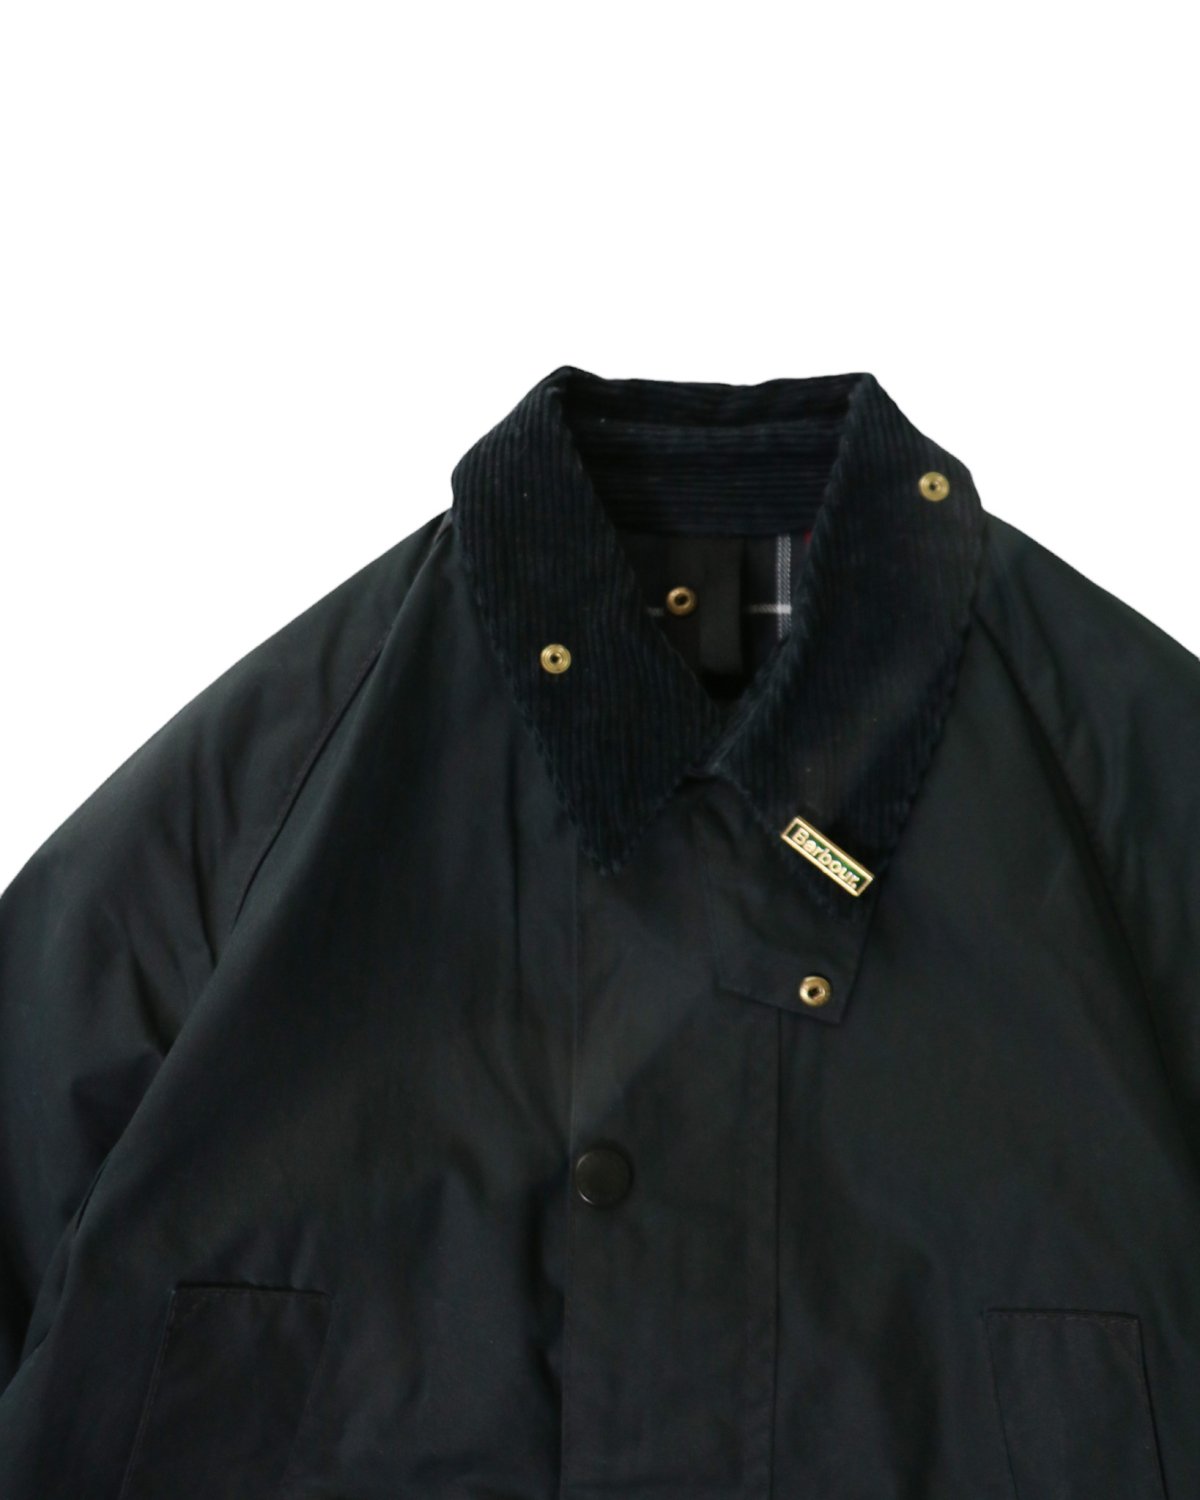 I&I 古着 通販 “Barbour” BEDALE 詳細画像4